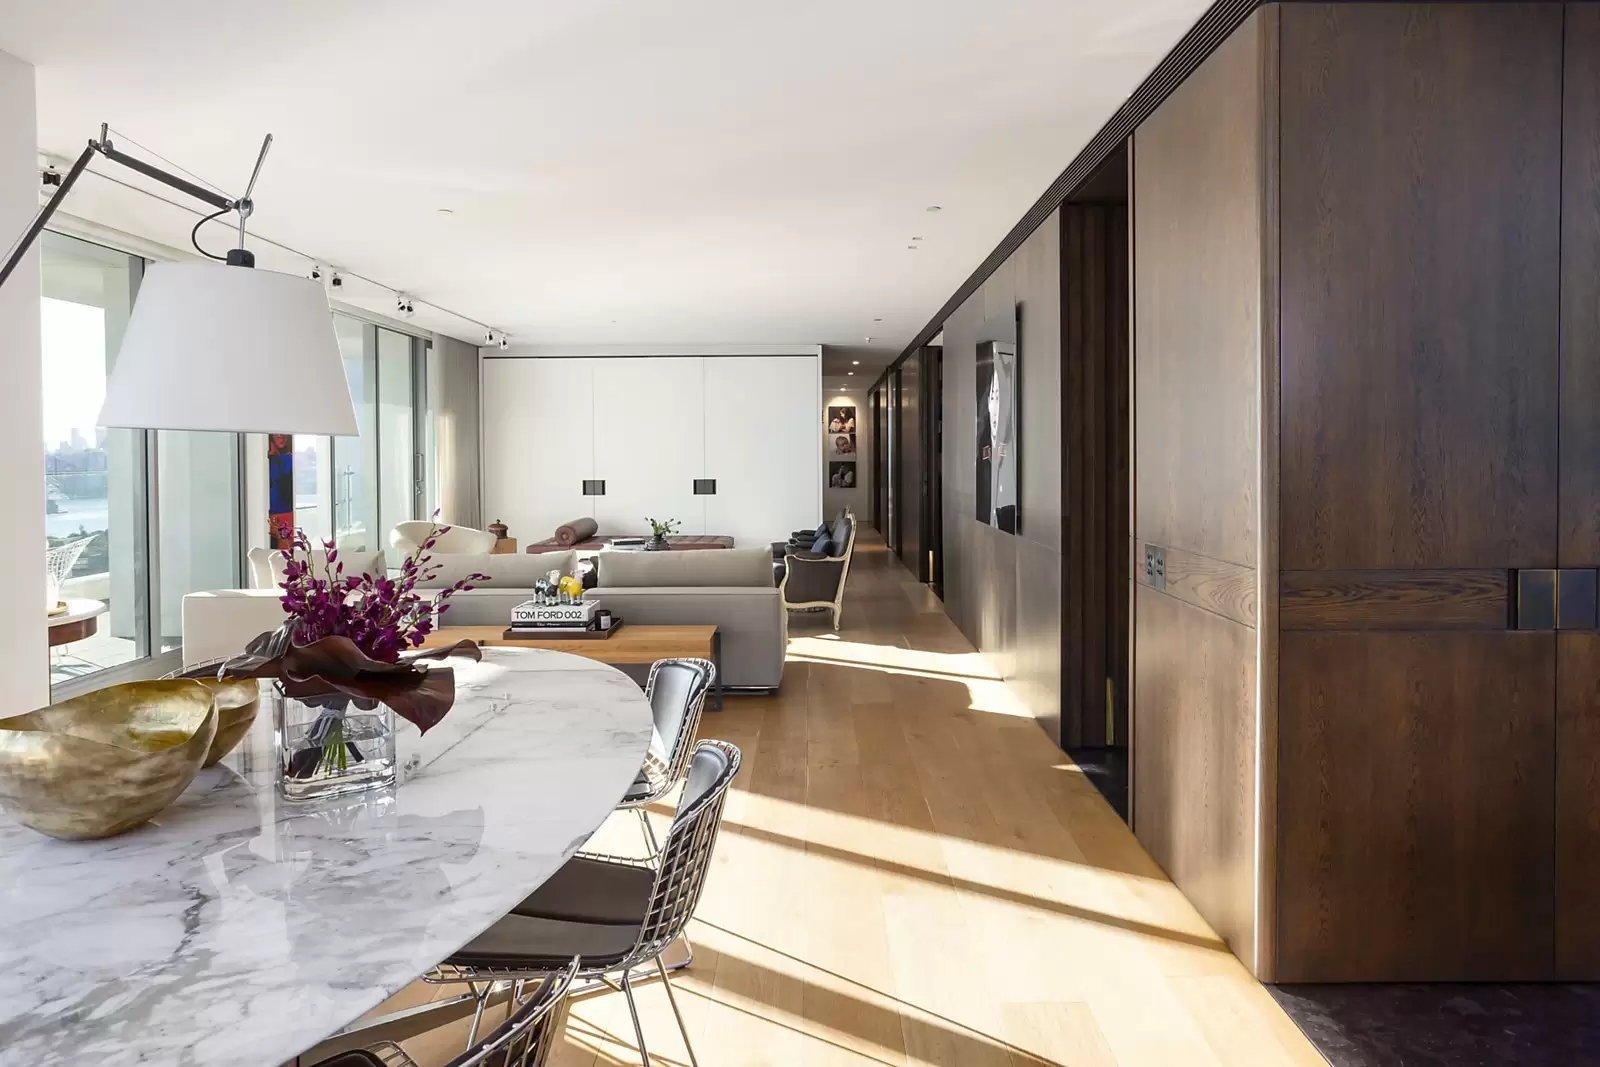 Photo #9: 1401/81 Macleay Street, Potts Point - Sold by Sydney Sotheby's International Realty